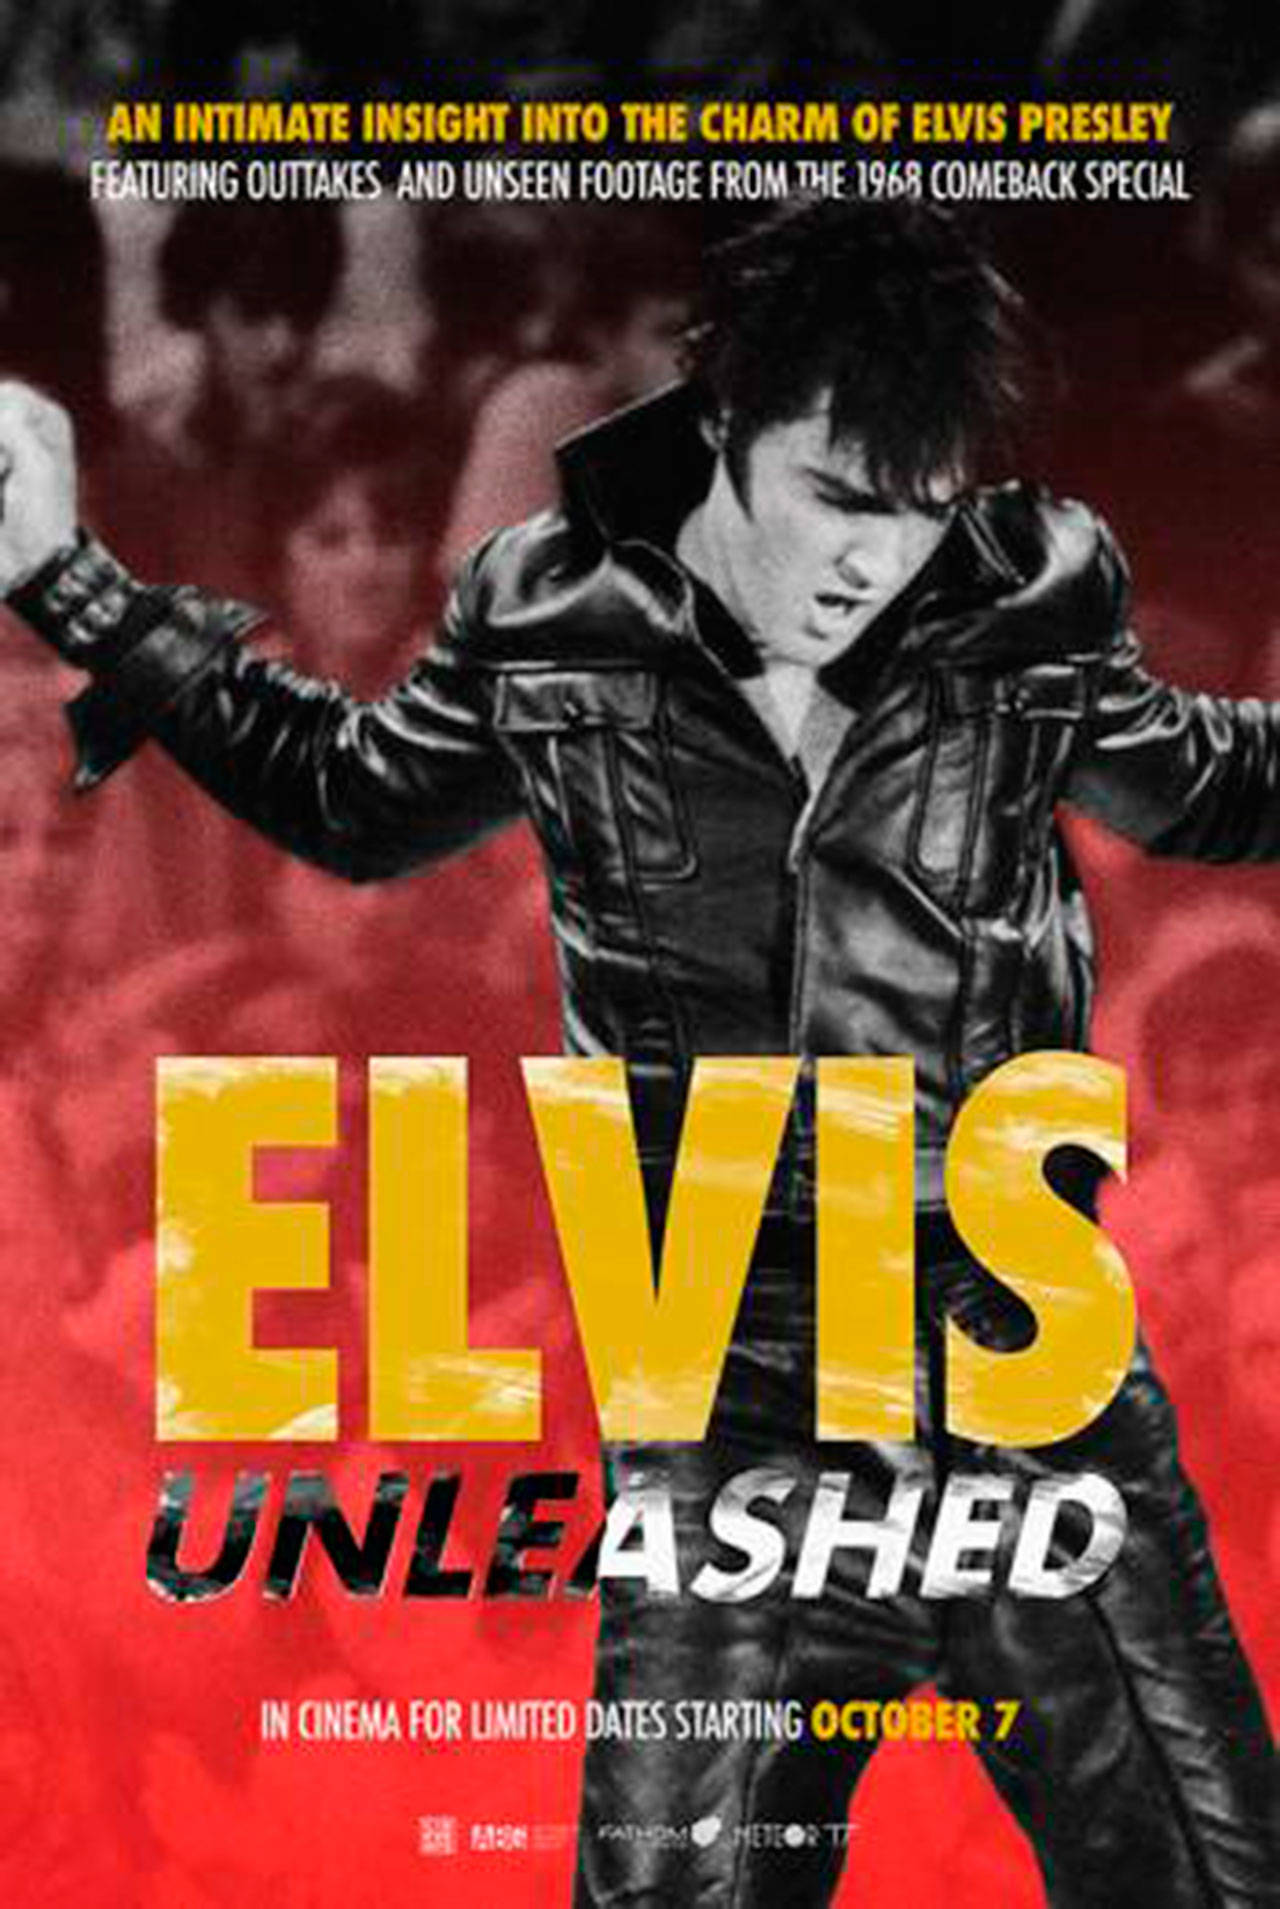 Image courtesy of FathomRocks.com | “Elvis Unleashed,” featuring previously unseen footage of the King as he filmed the iconic “68 Comeback Special,” will be screened one-night-only at Bainbridge Cinemas, at 7 p.m. Thursday, Oct. 10.